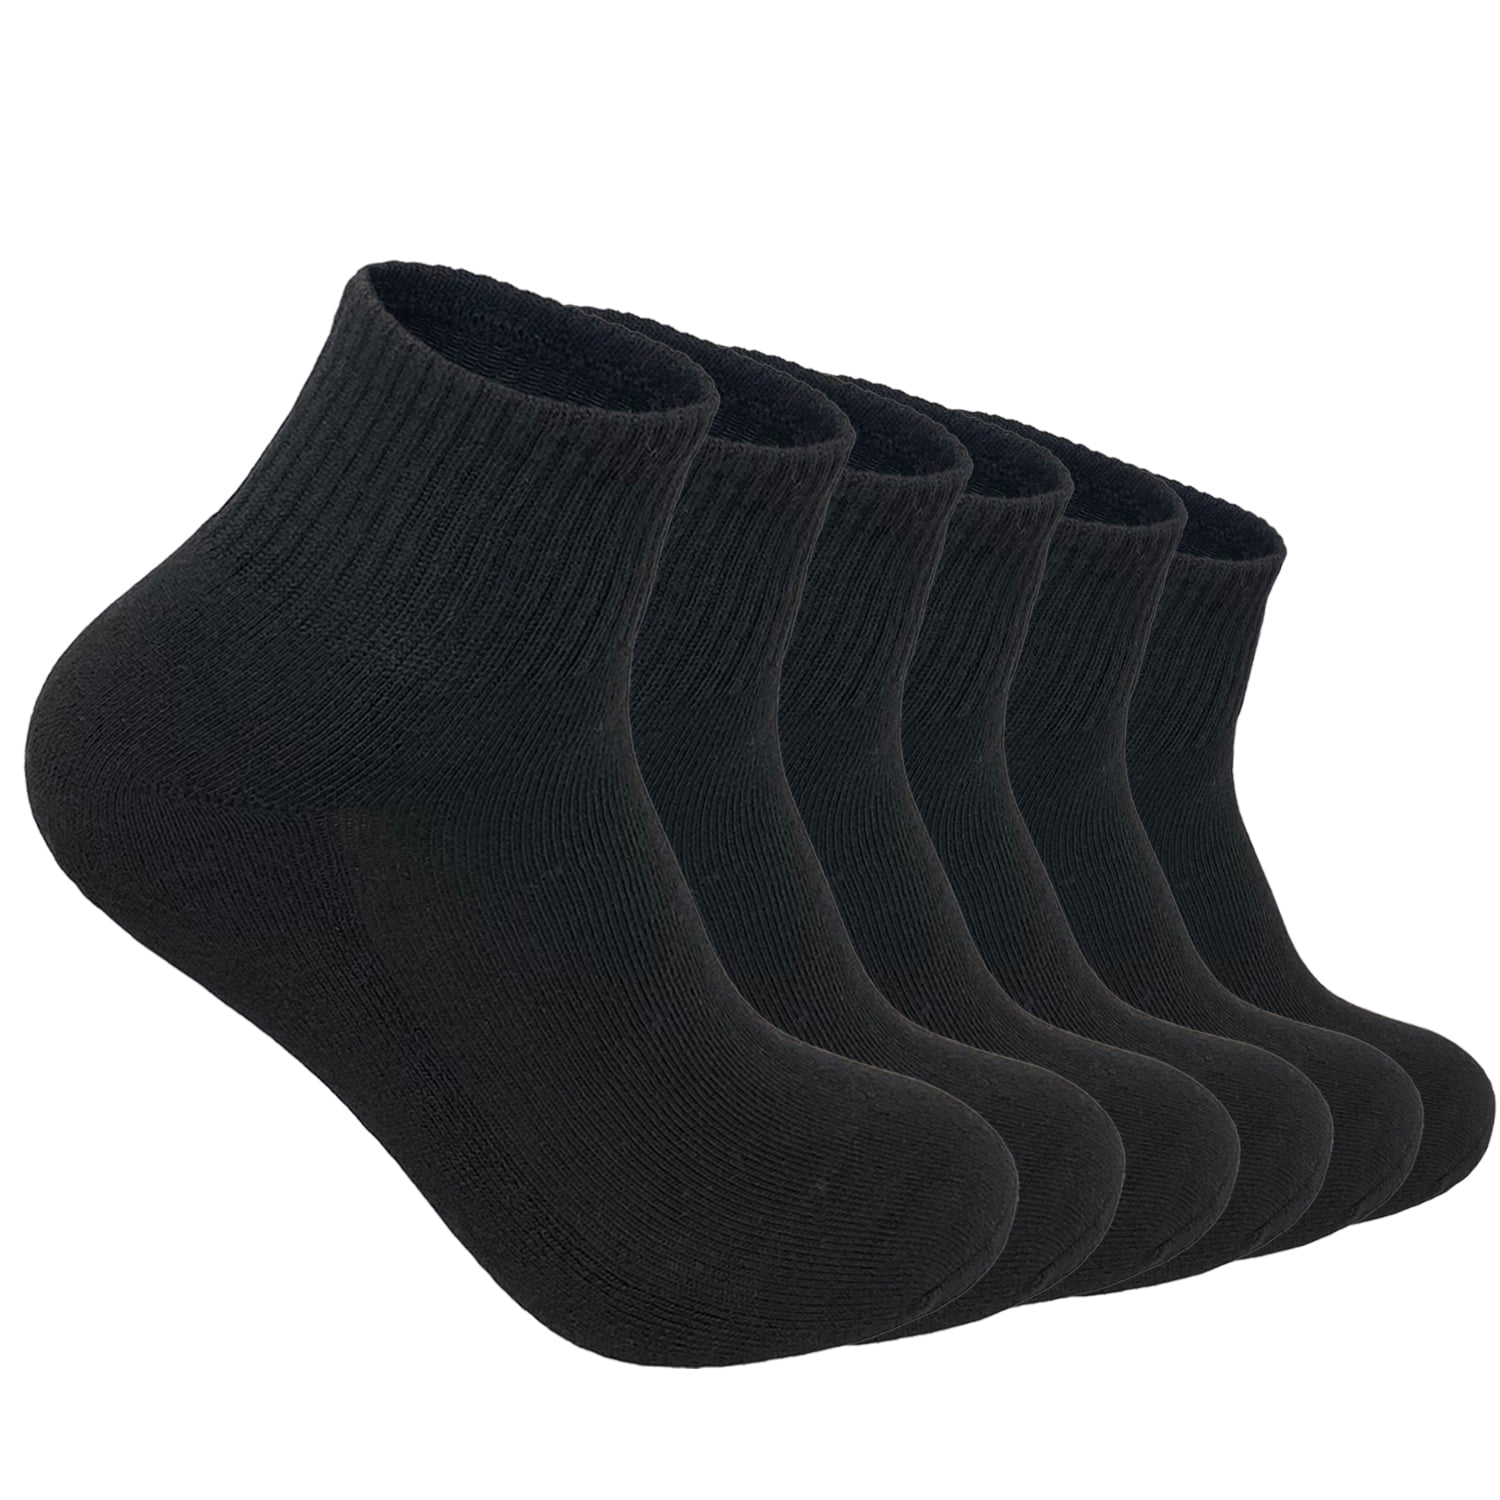 Athletic Five Finger Socks Crew Socks Outdoor Breathable Stretch Causal  Skin Friendly Sport Sock Calcetines Hombre Носки Мужские